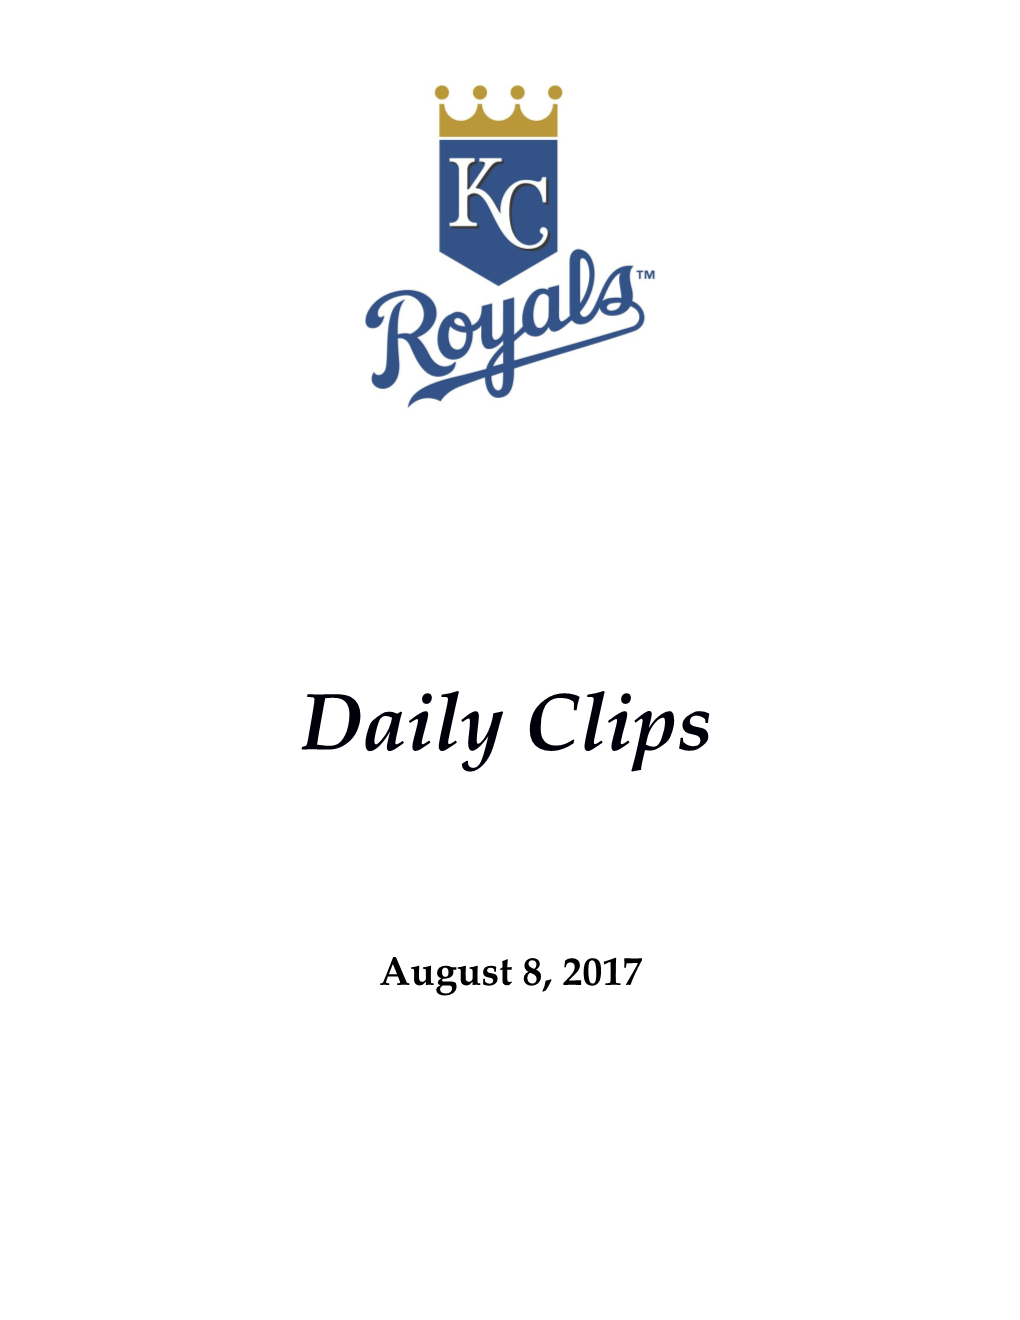 Moose Cracks 32Nd HR, but Royals Fall to Cards